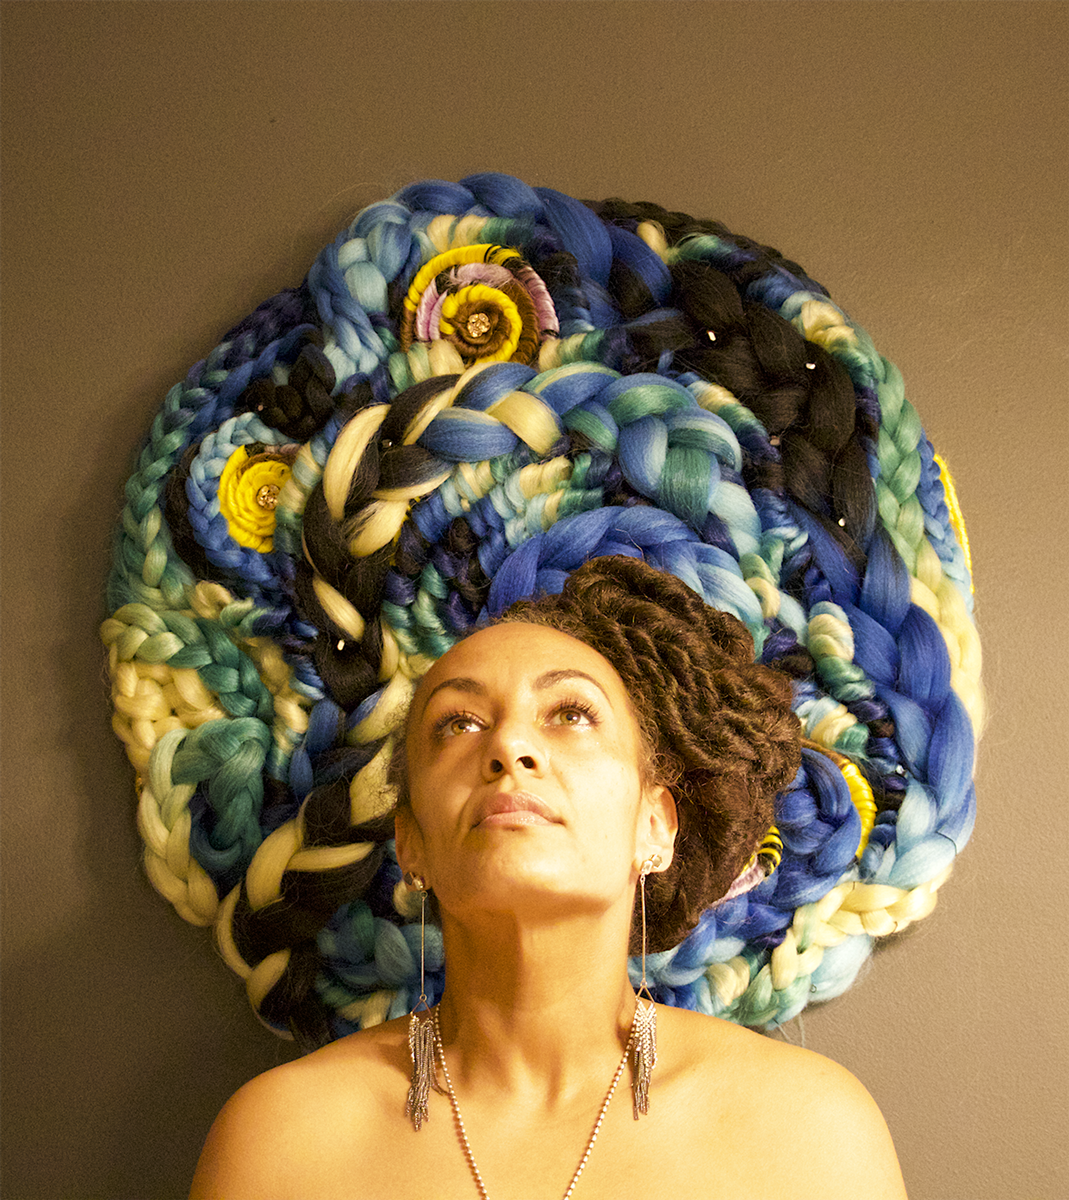 Image of a female looking upwards with a braided blue yellow and green tapestry behind her